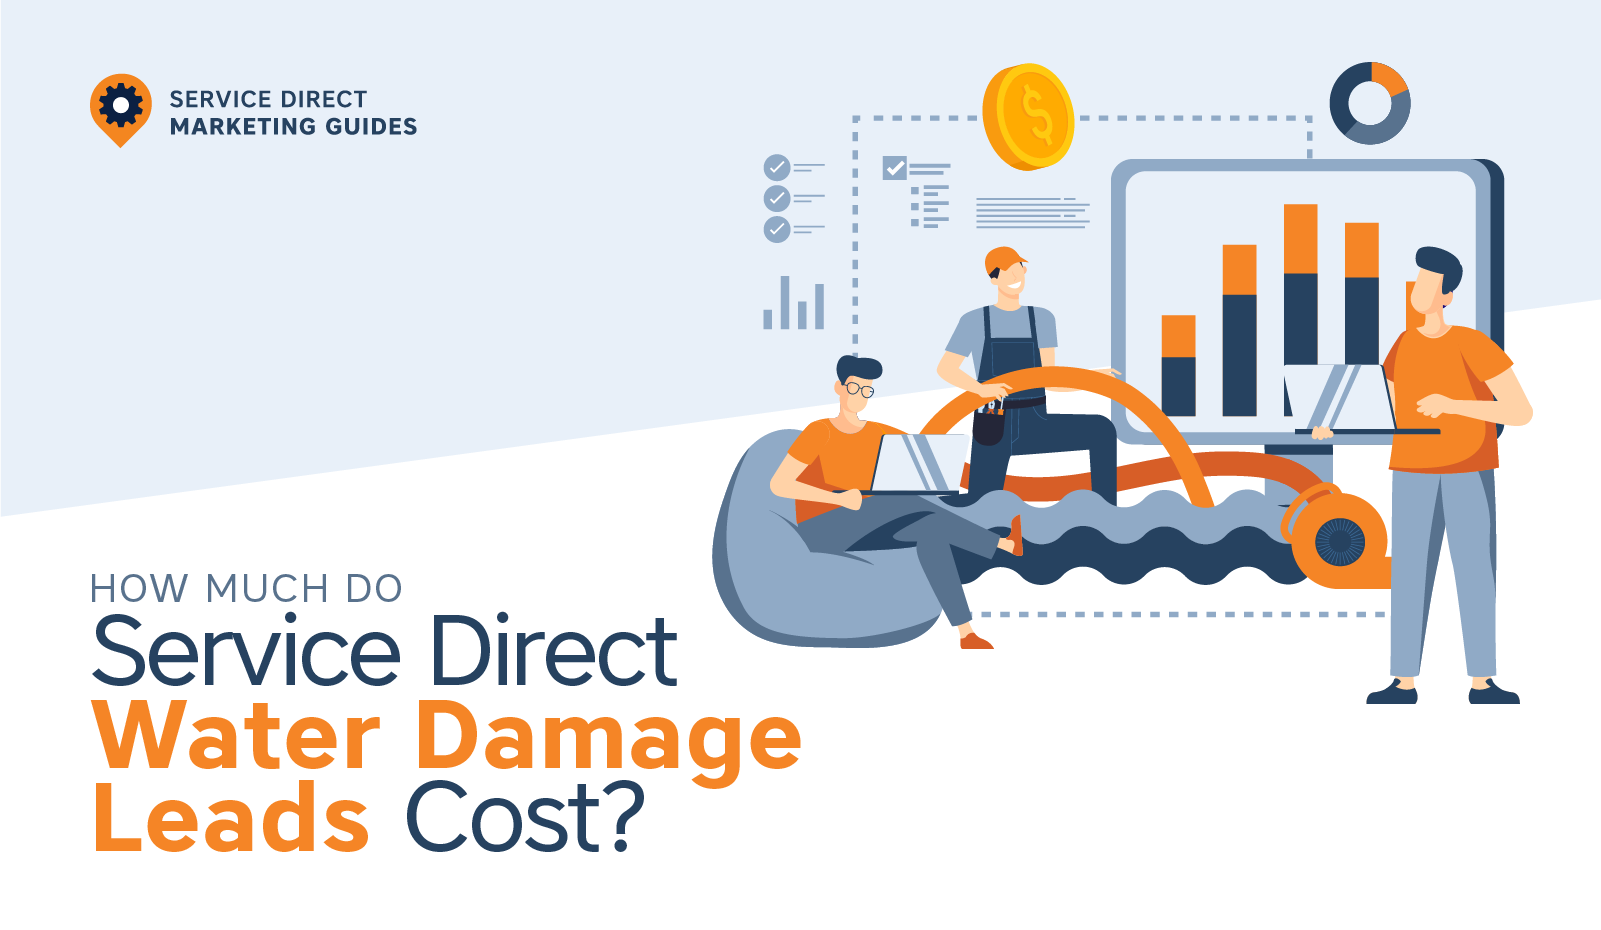 How Much Do Service Direct Water Damage Leads Cost?